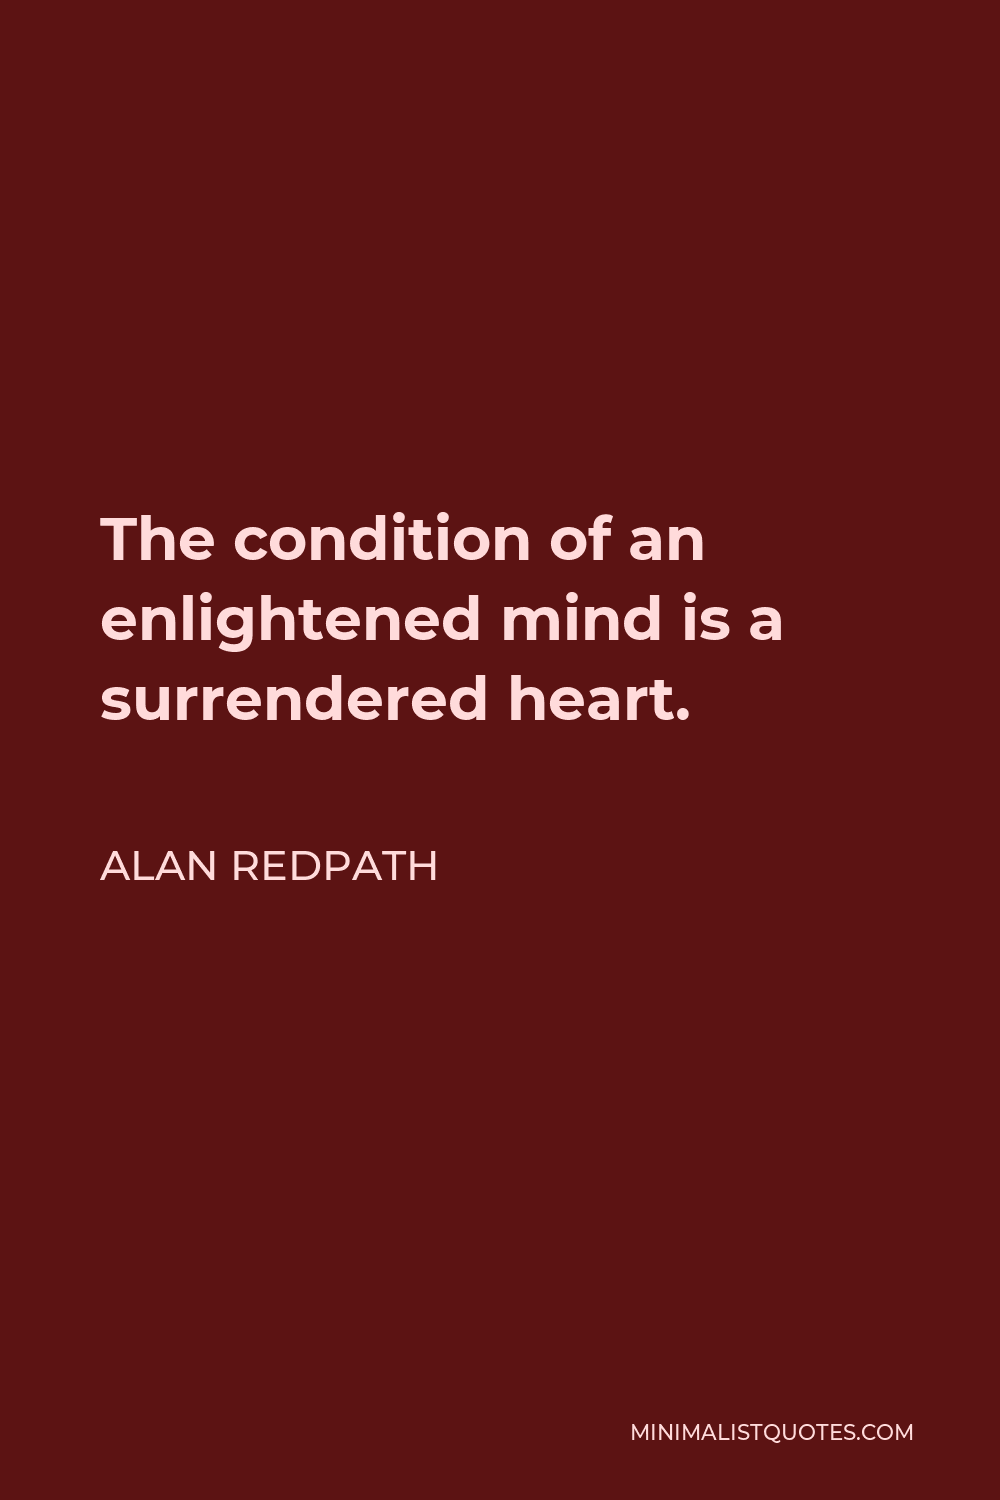 Alan Redpath Quote - The condition of an enlightened mind is a surrendered heart.